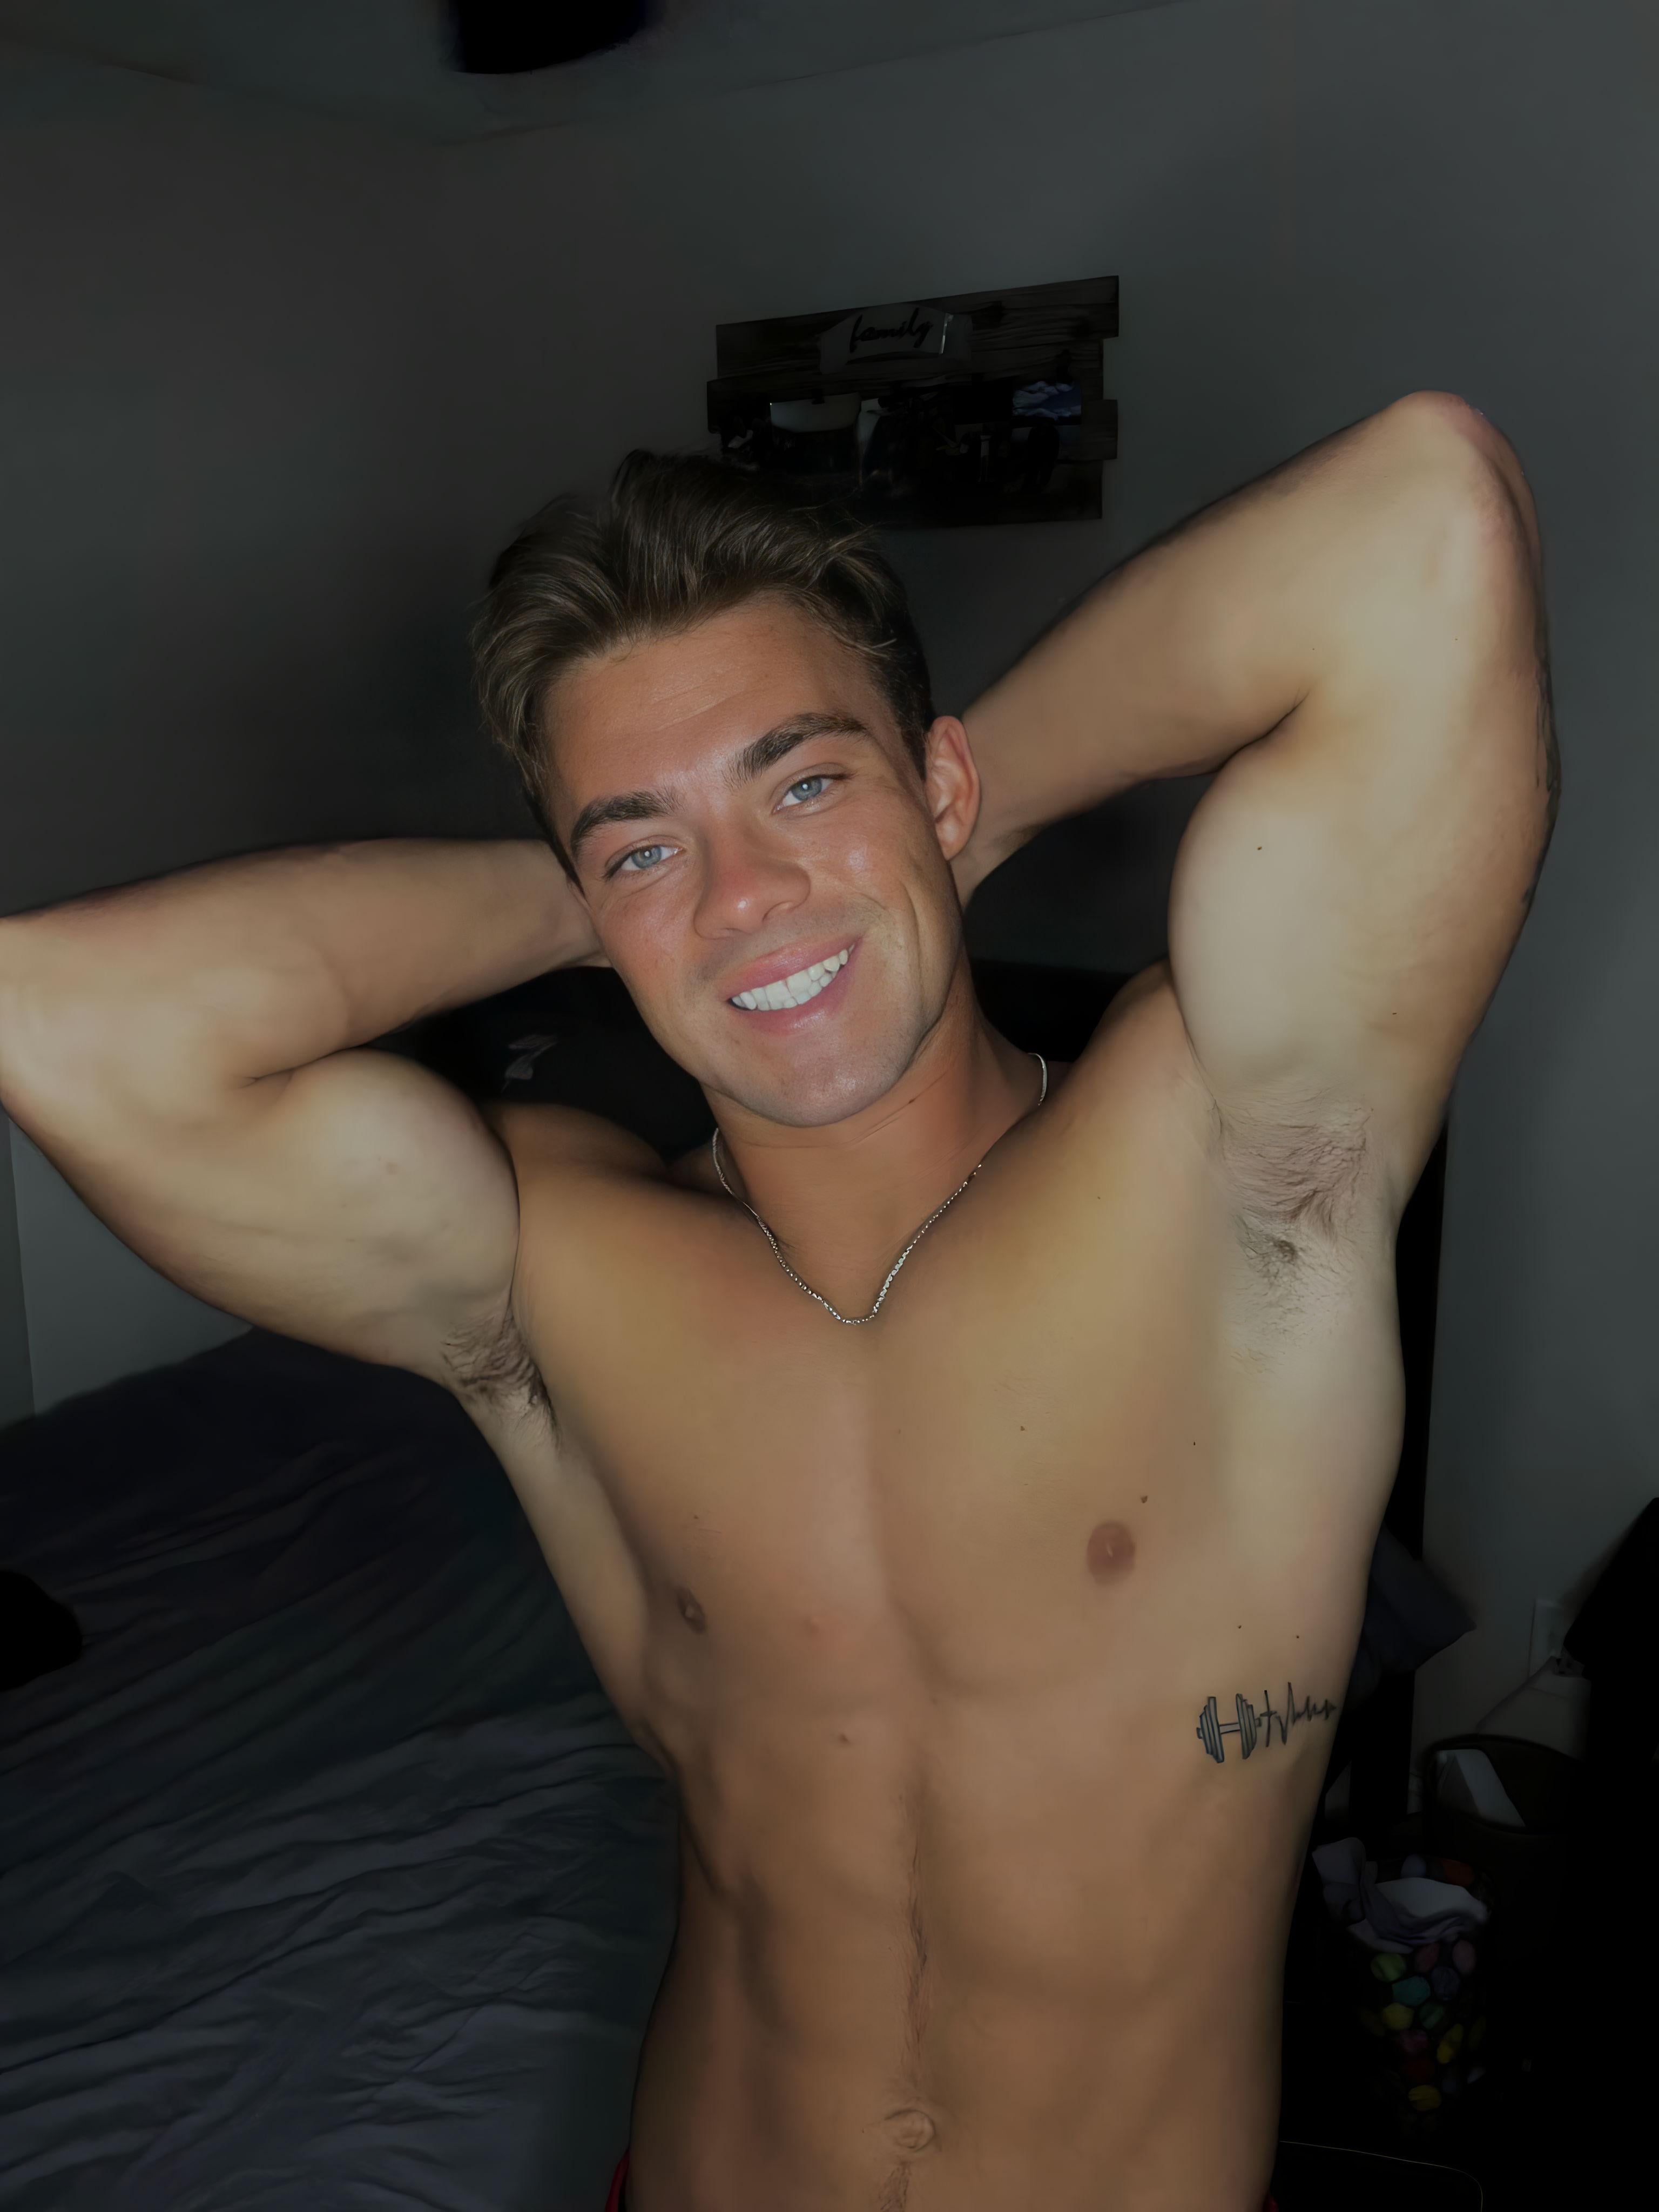 Which style is best Hairy Daddy look or shaved muscle